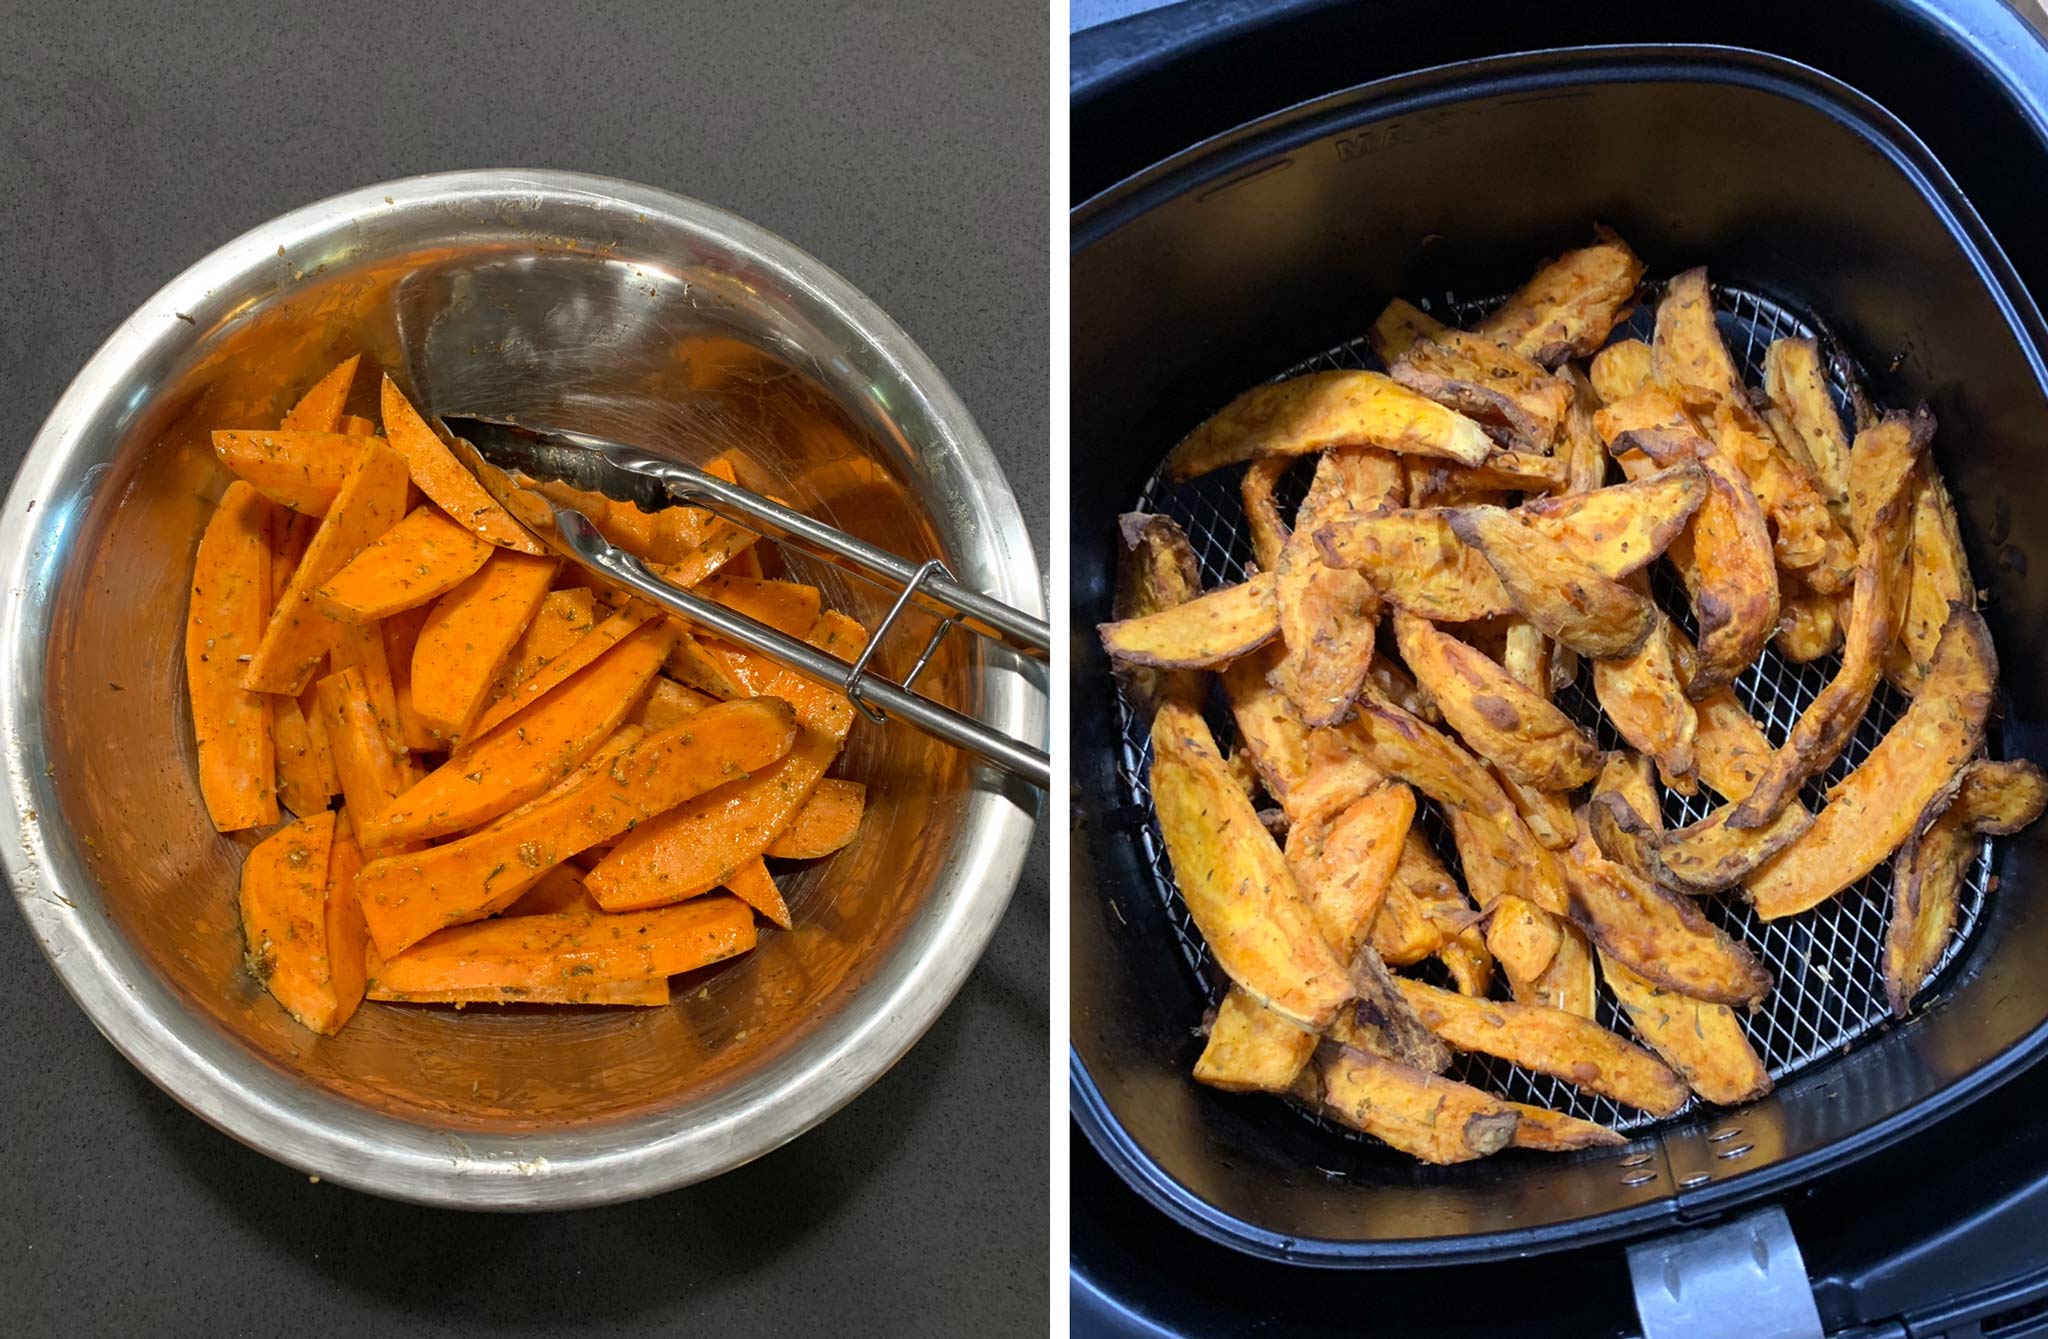 sweet potato fries cooked in the air fryer - one of the first air fryer recipes I tried